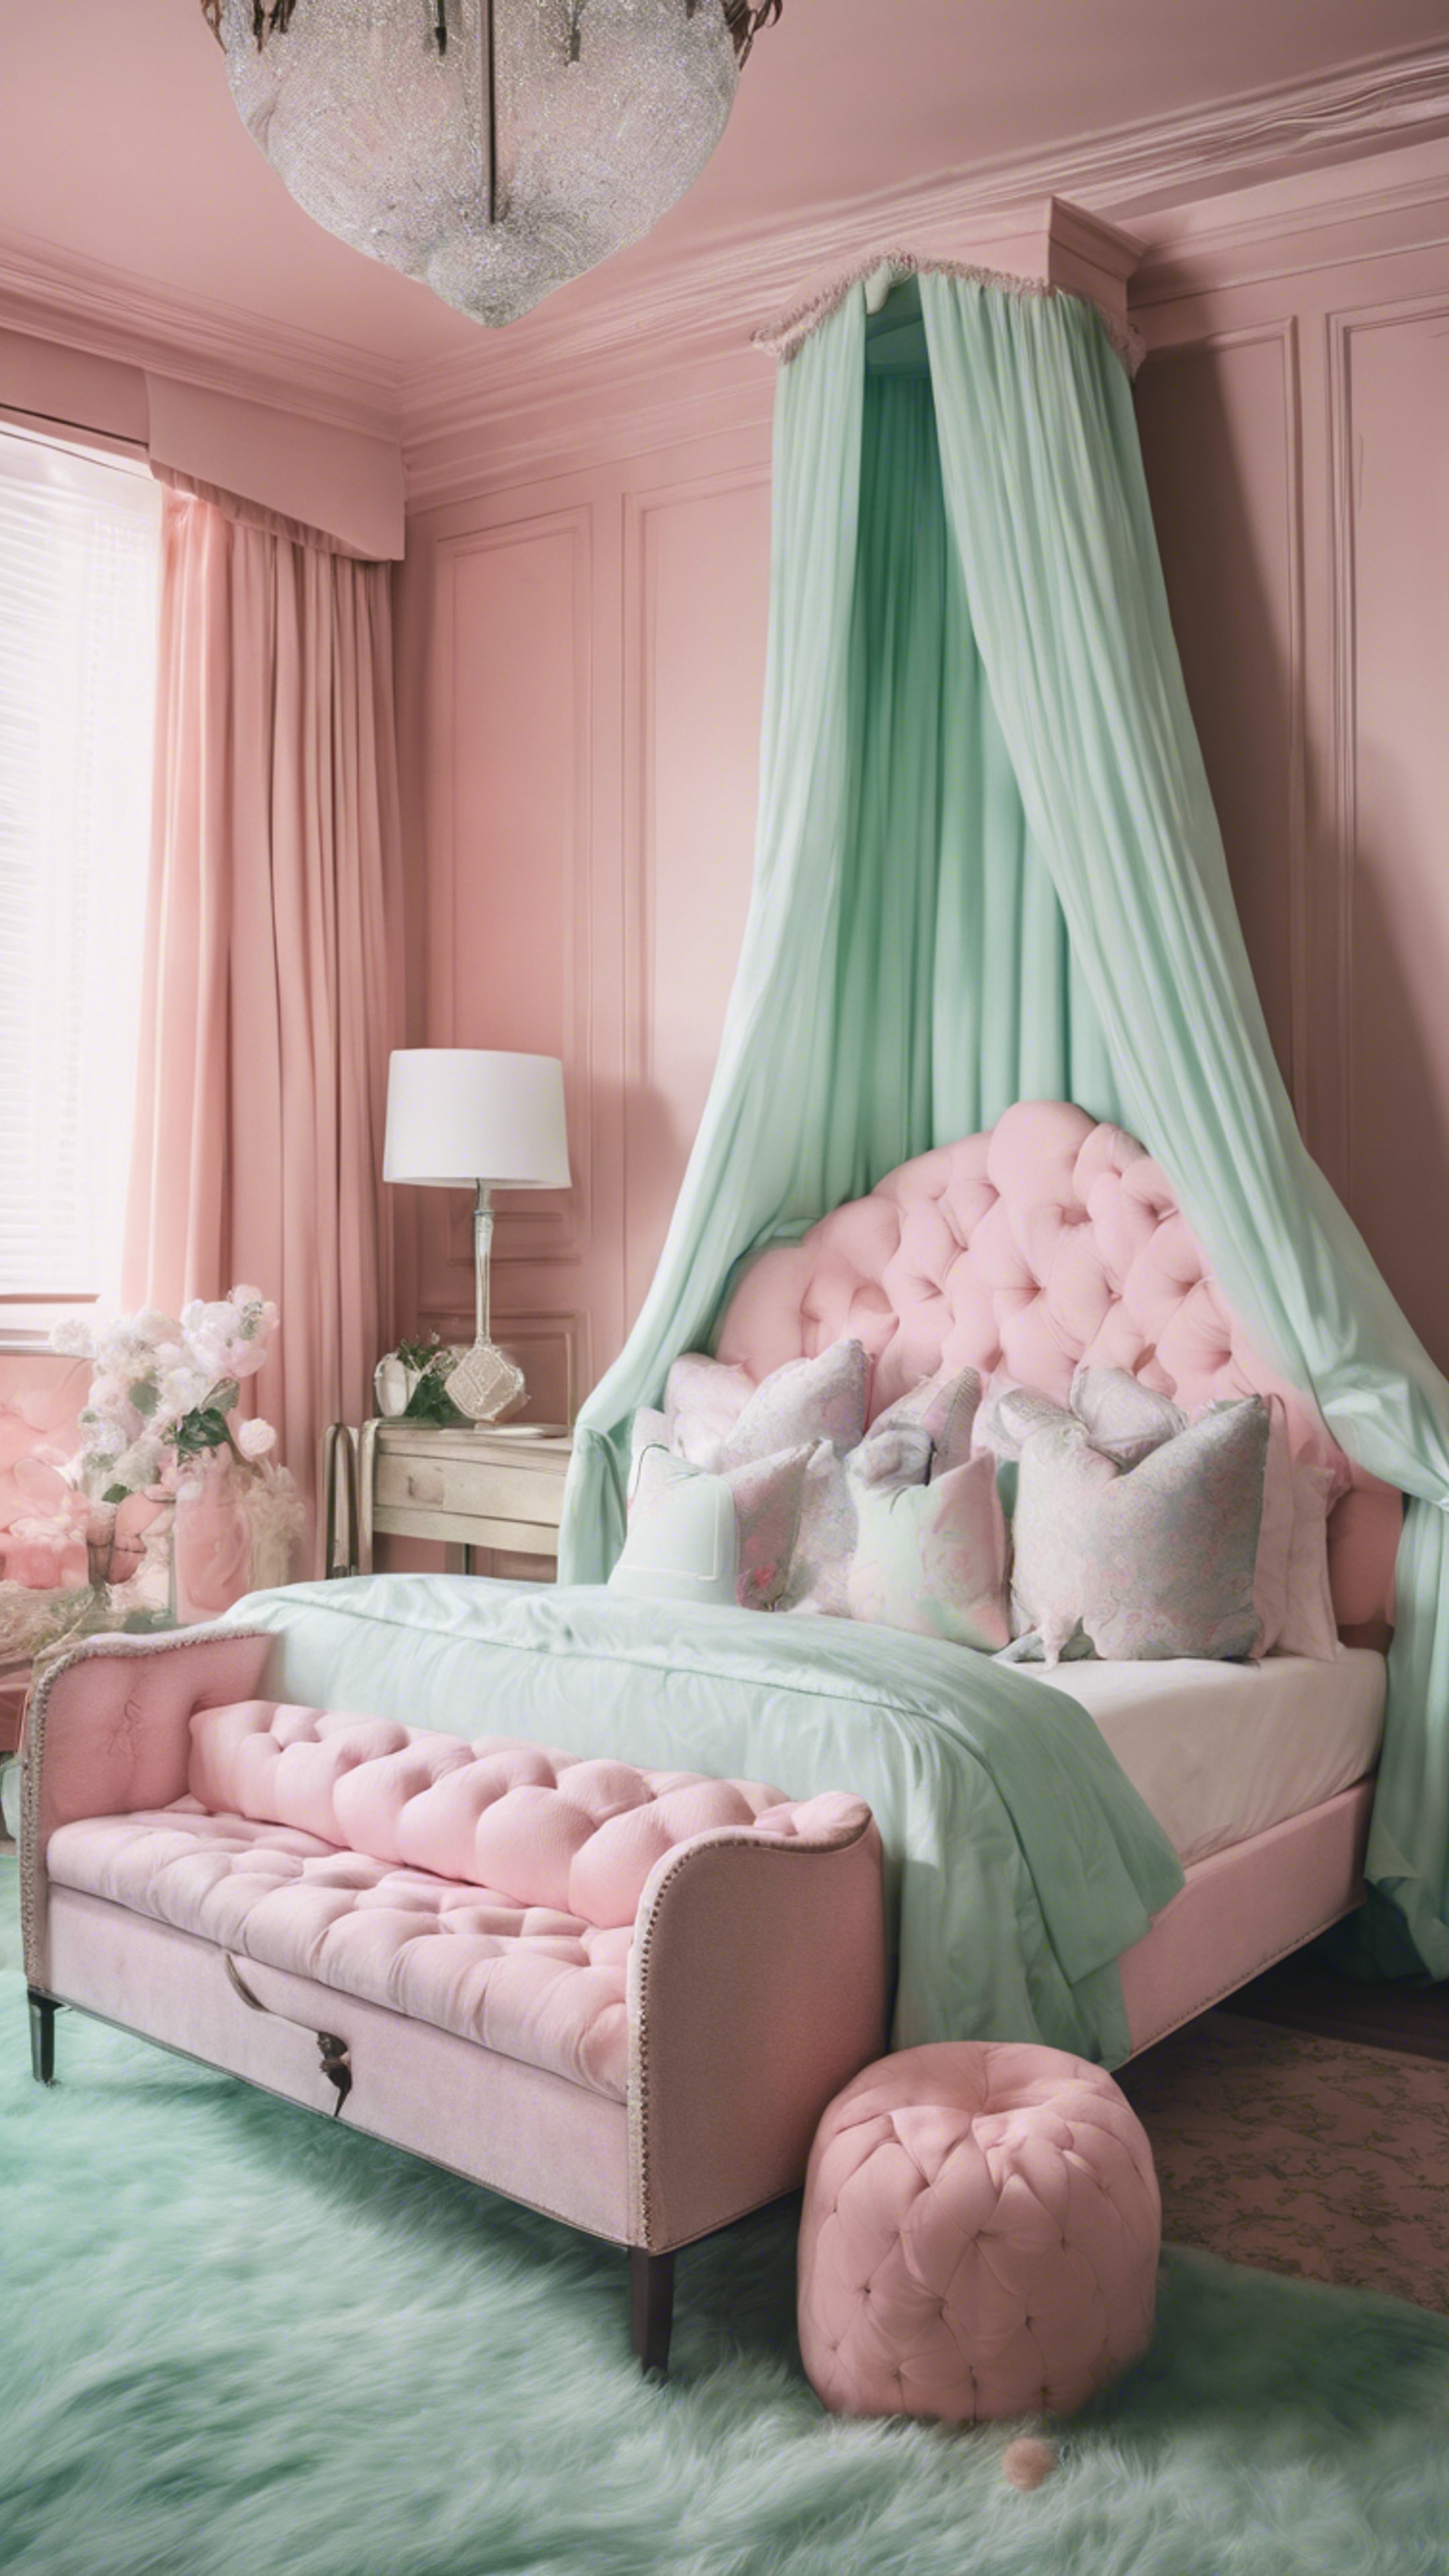 A sprawling pink and mint green preppy-style bedroom with a canopy bed and monogrammed pillows. Tapet[80ed71ae36e84fc093e2]